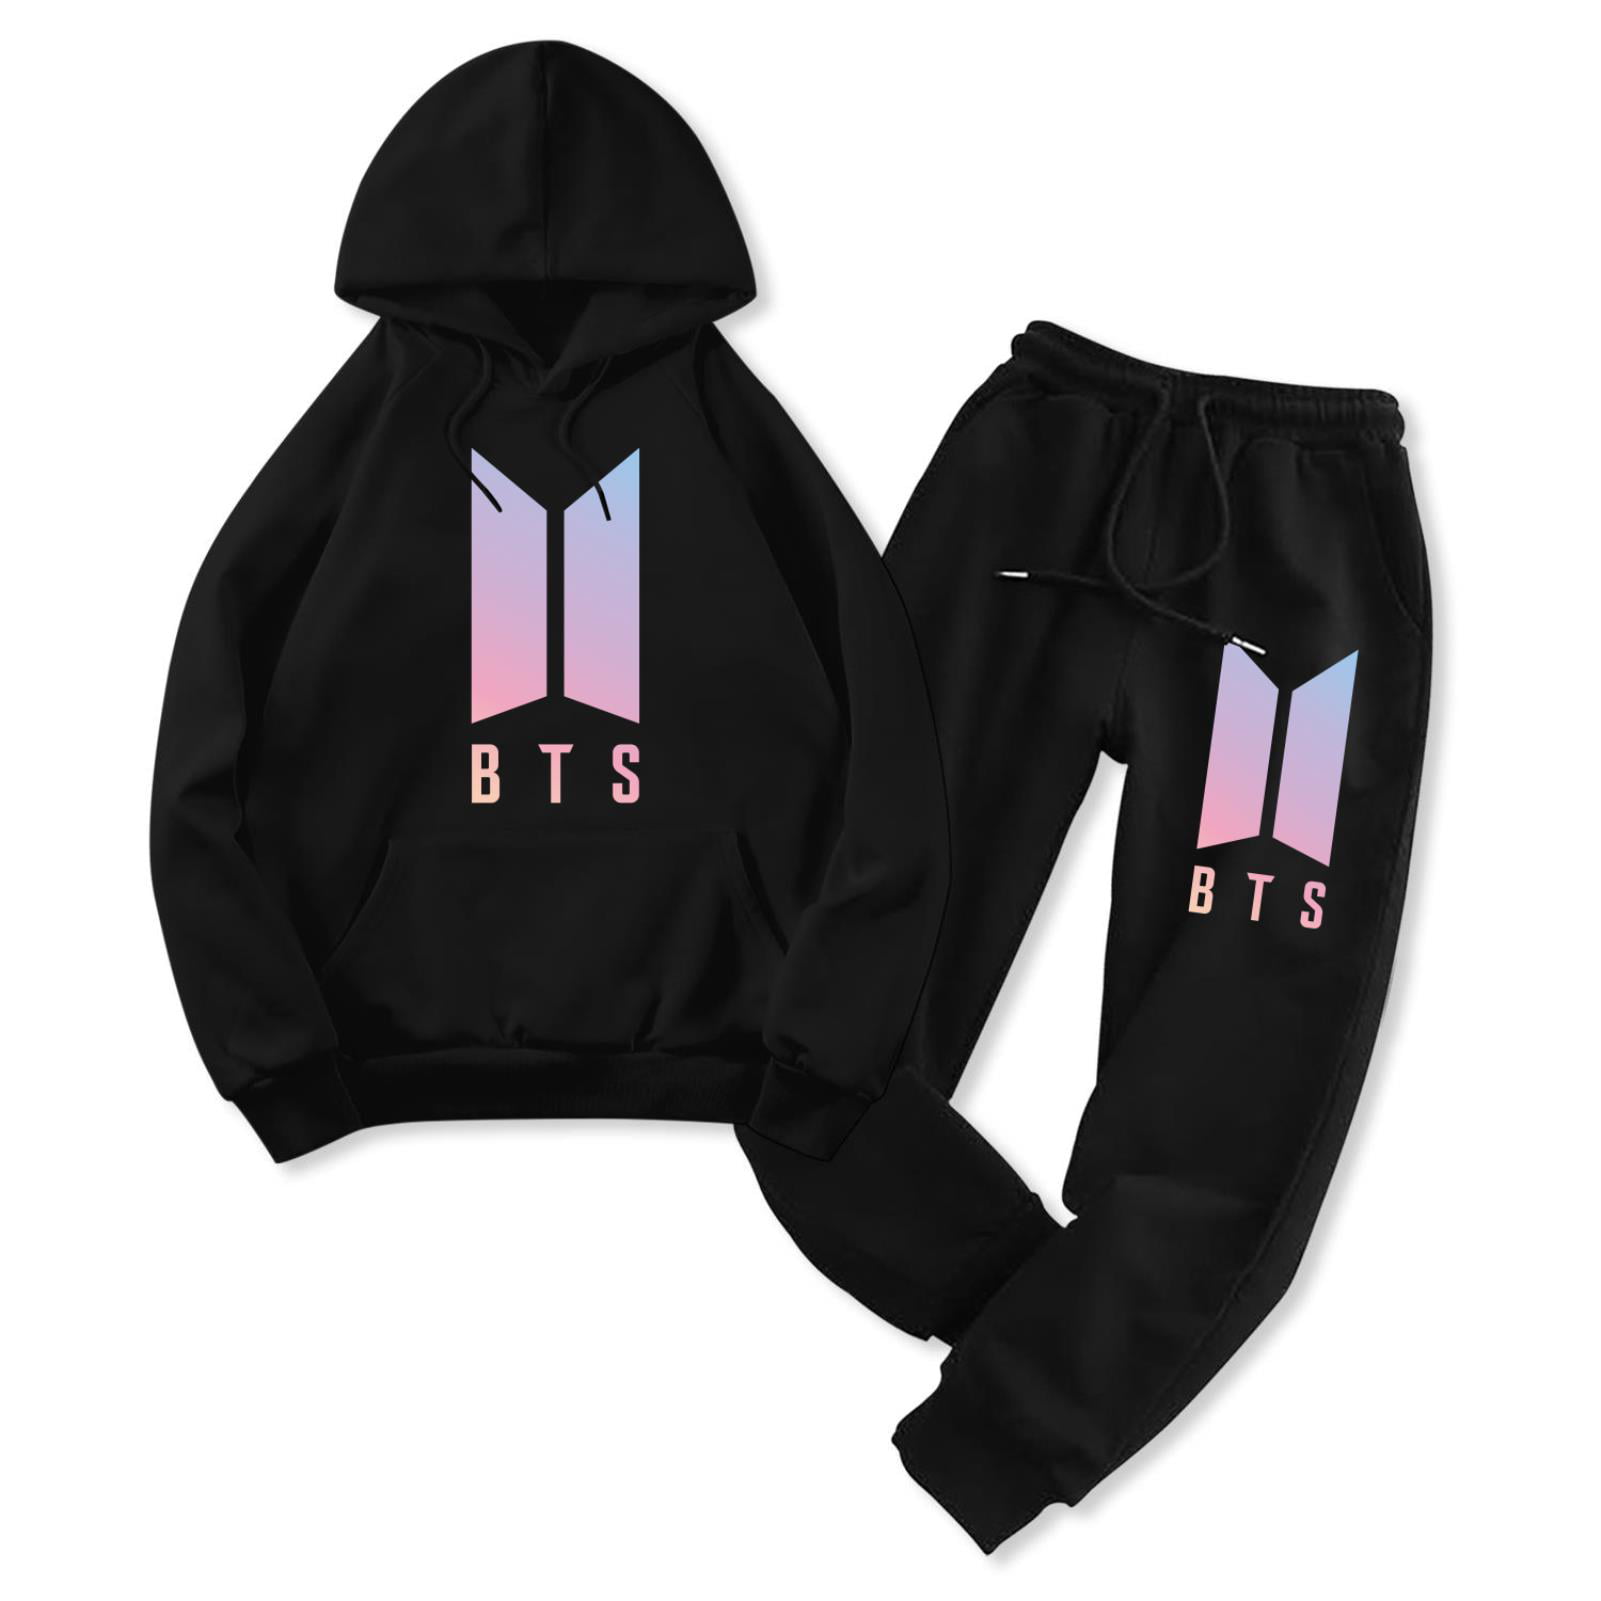 Adult BTS Pullover Hoodies and Sweatpants 2 Piece Outfit Set